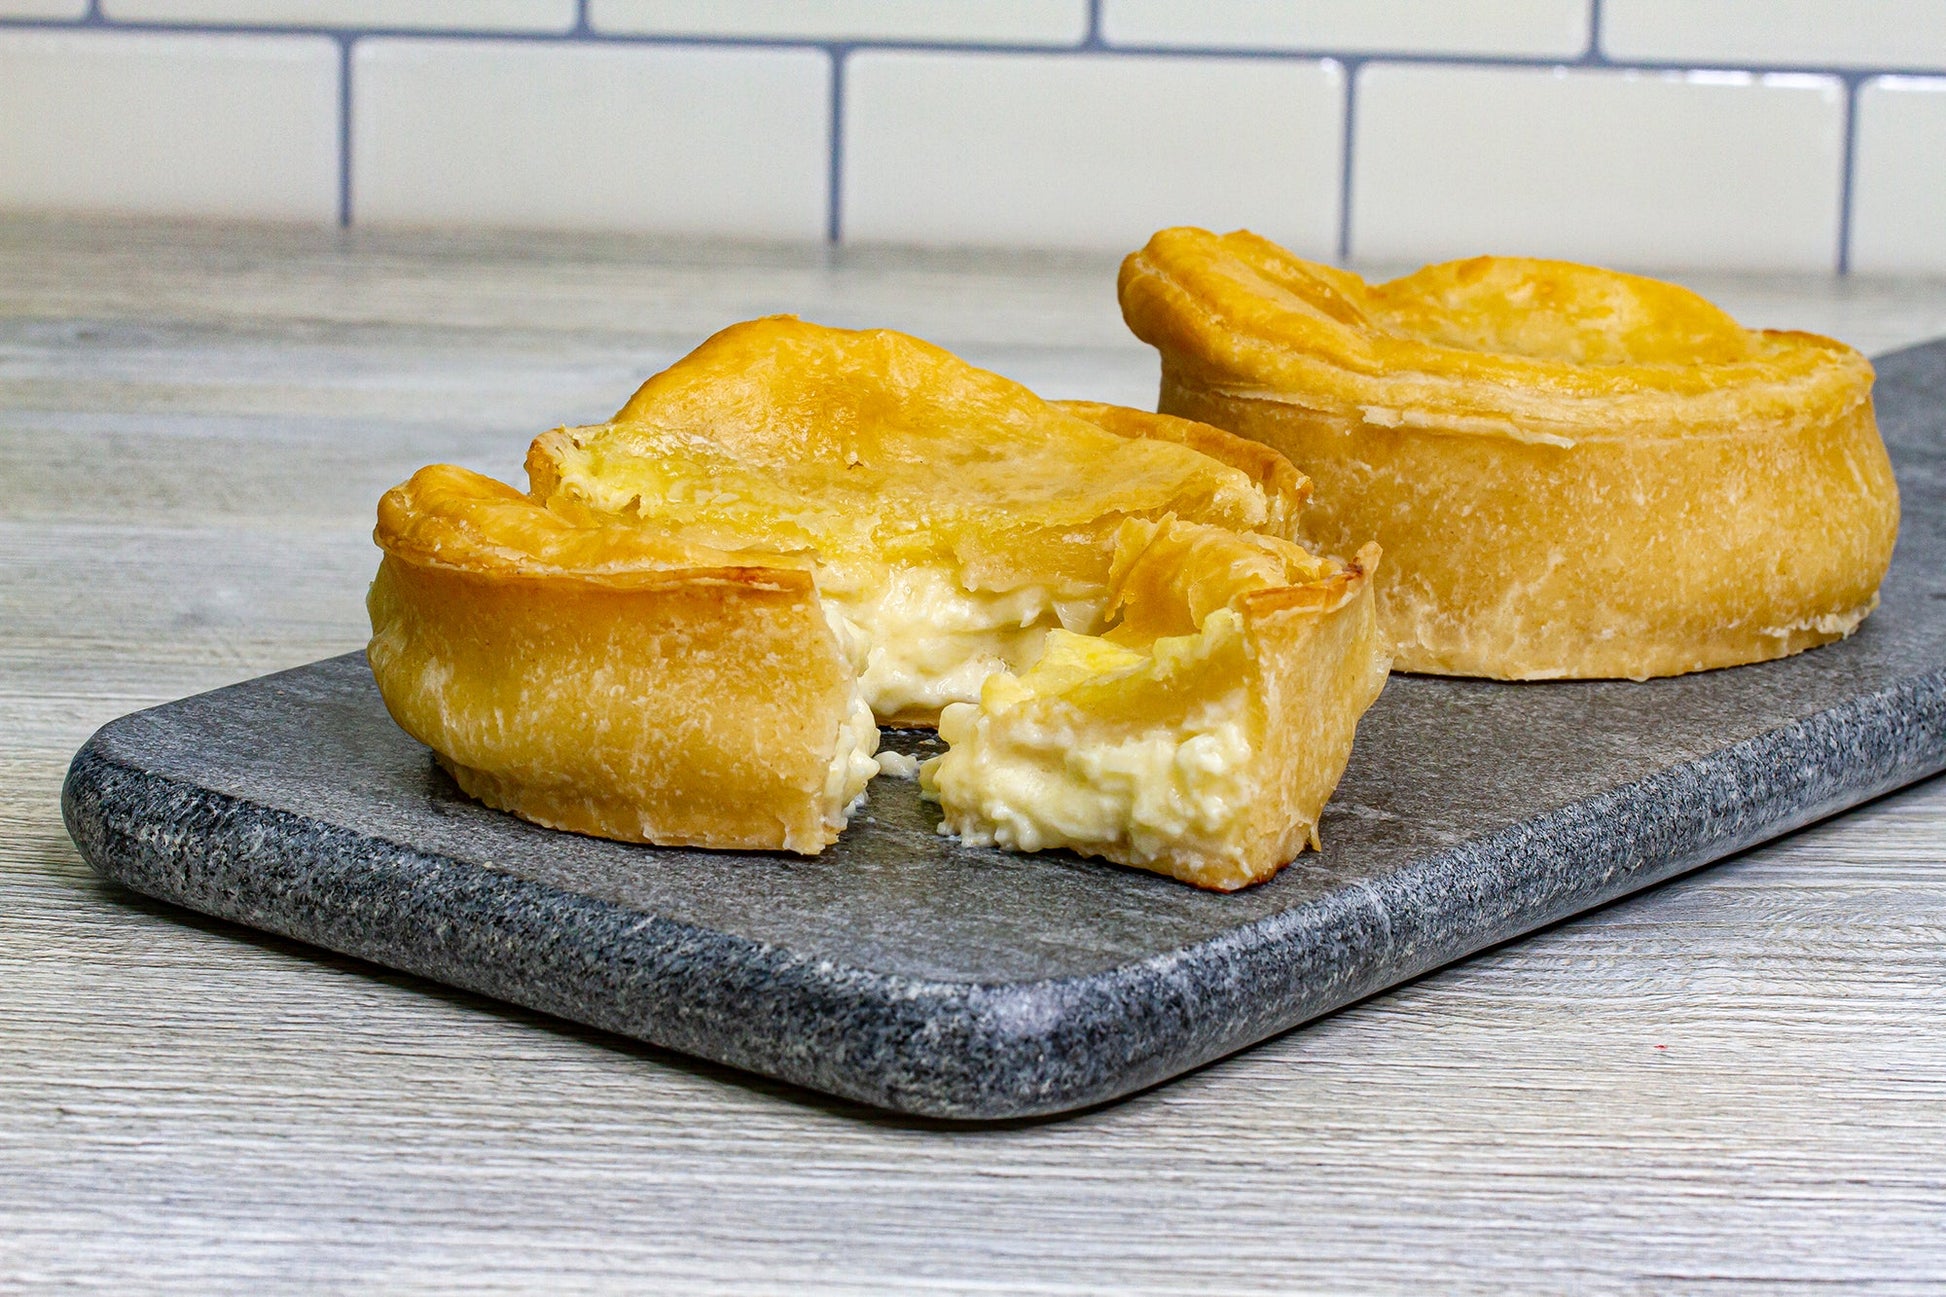 Cheese and Onion Pie (4 pack) - Ackroyd's Scottish Bakery